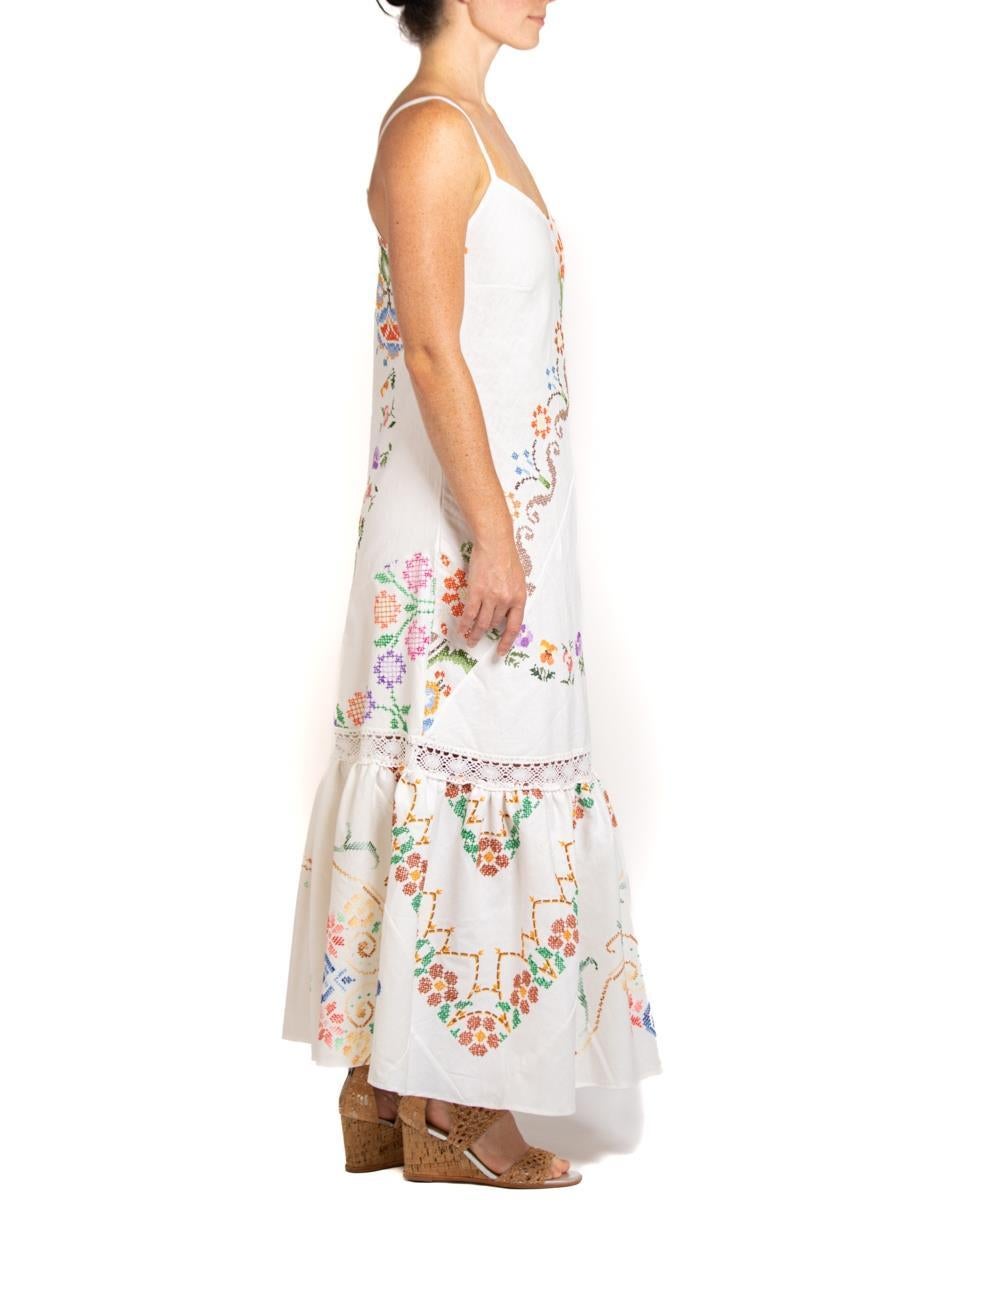 Women's MORPHEW COLLECTION White & Floral Hand Embroidered Fabric From France Dress For Sale